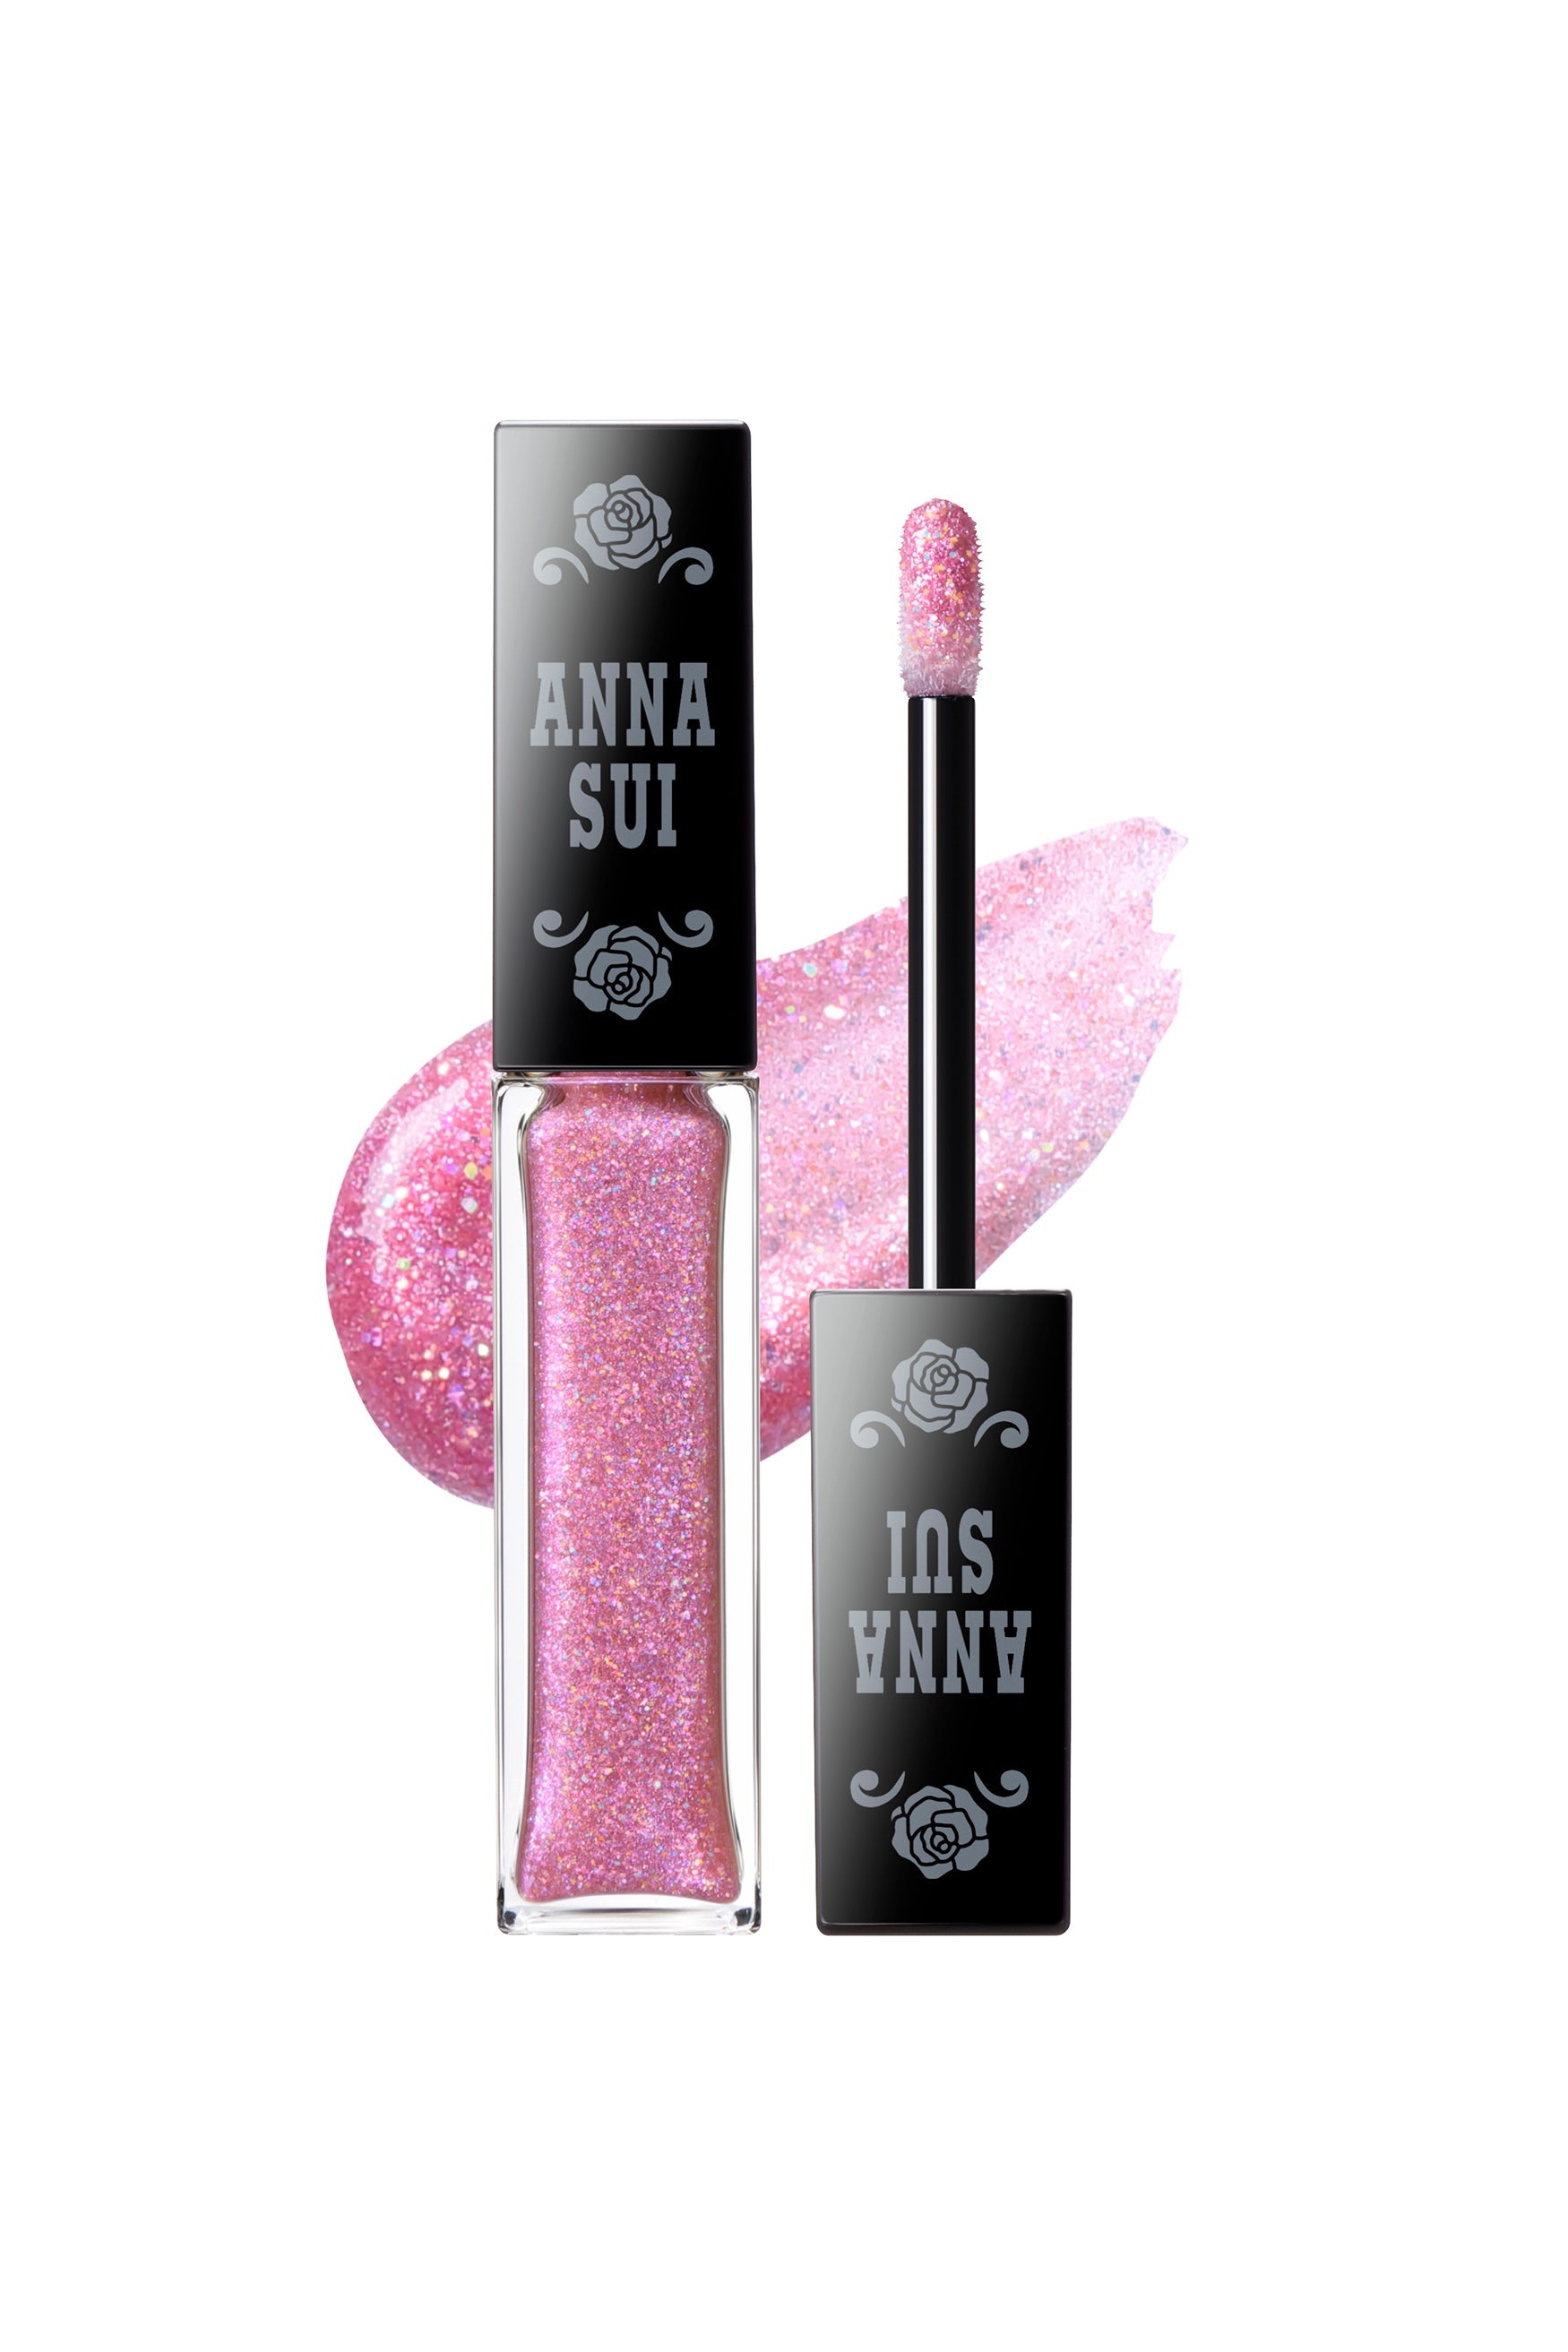 PINK PARADE, Eye Glitter in a transparent bottle with Anna Sui label on the black top